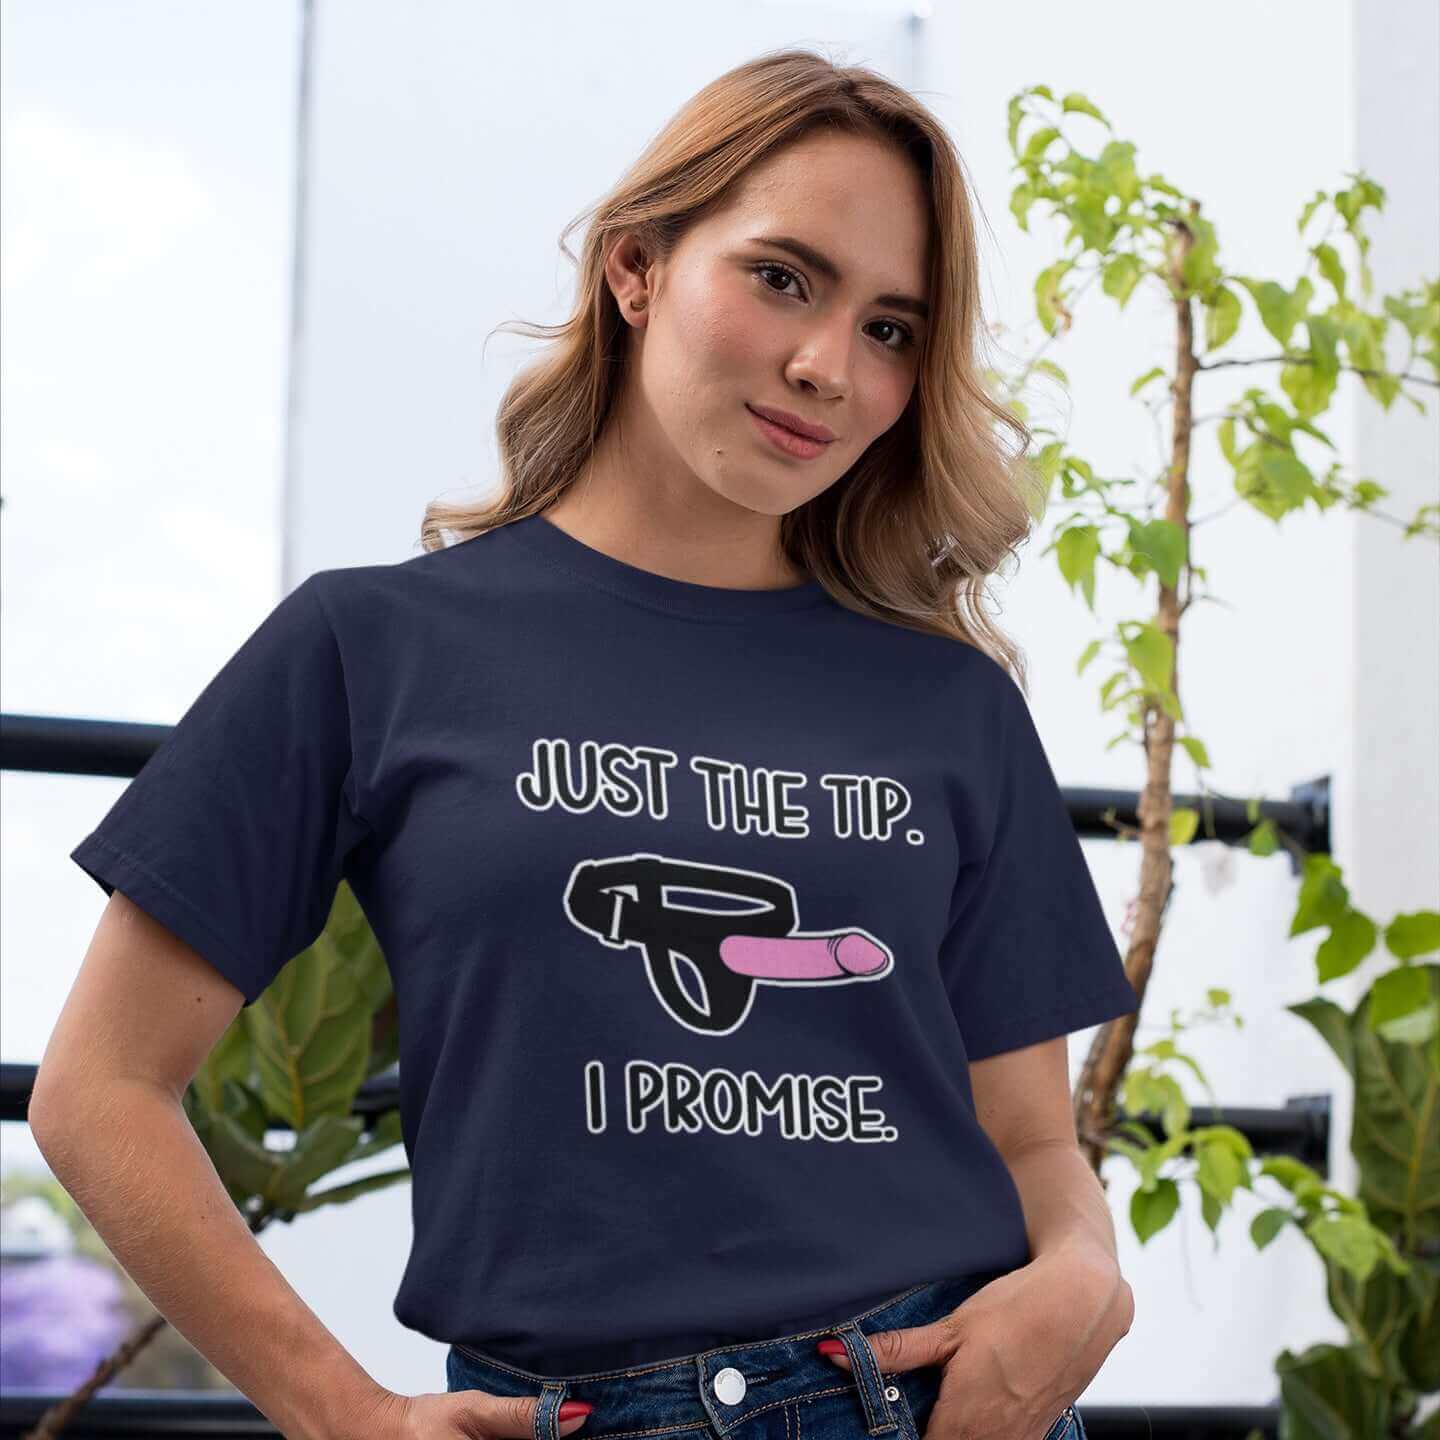 Woman wearing navy blue t-shirt that has an image of a strap-on dildo and the words Just the tip, I promise printed on the front. The graphics are pink, black and white.